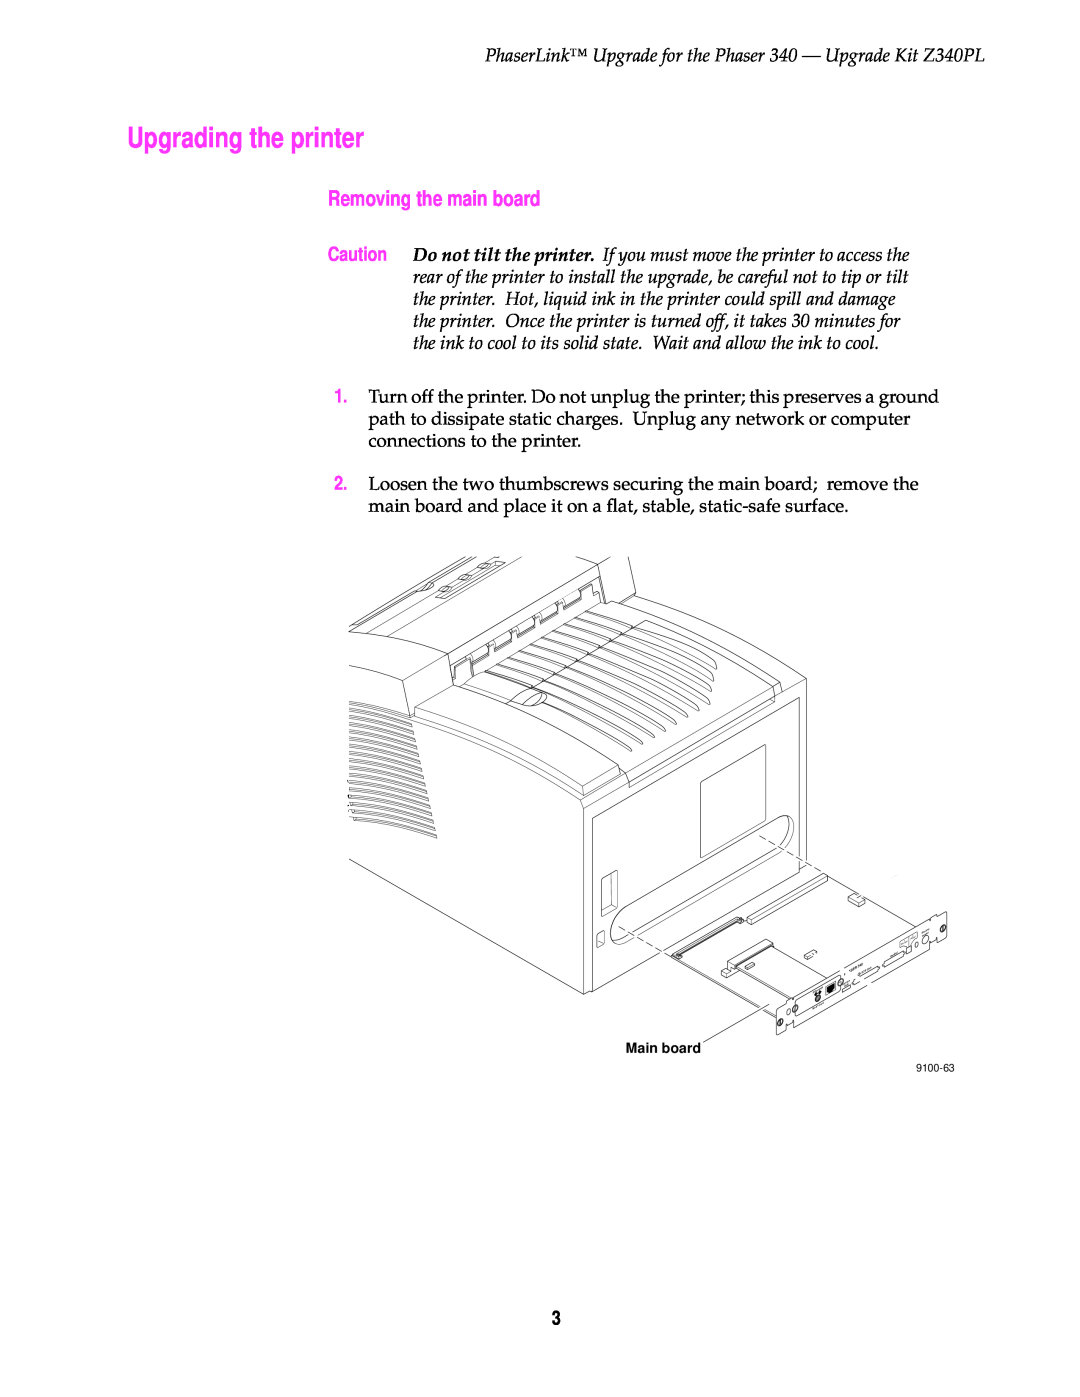 3Com Z340PL instruction sheet Upgrading the printer, Removing the main board 